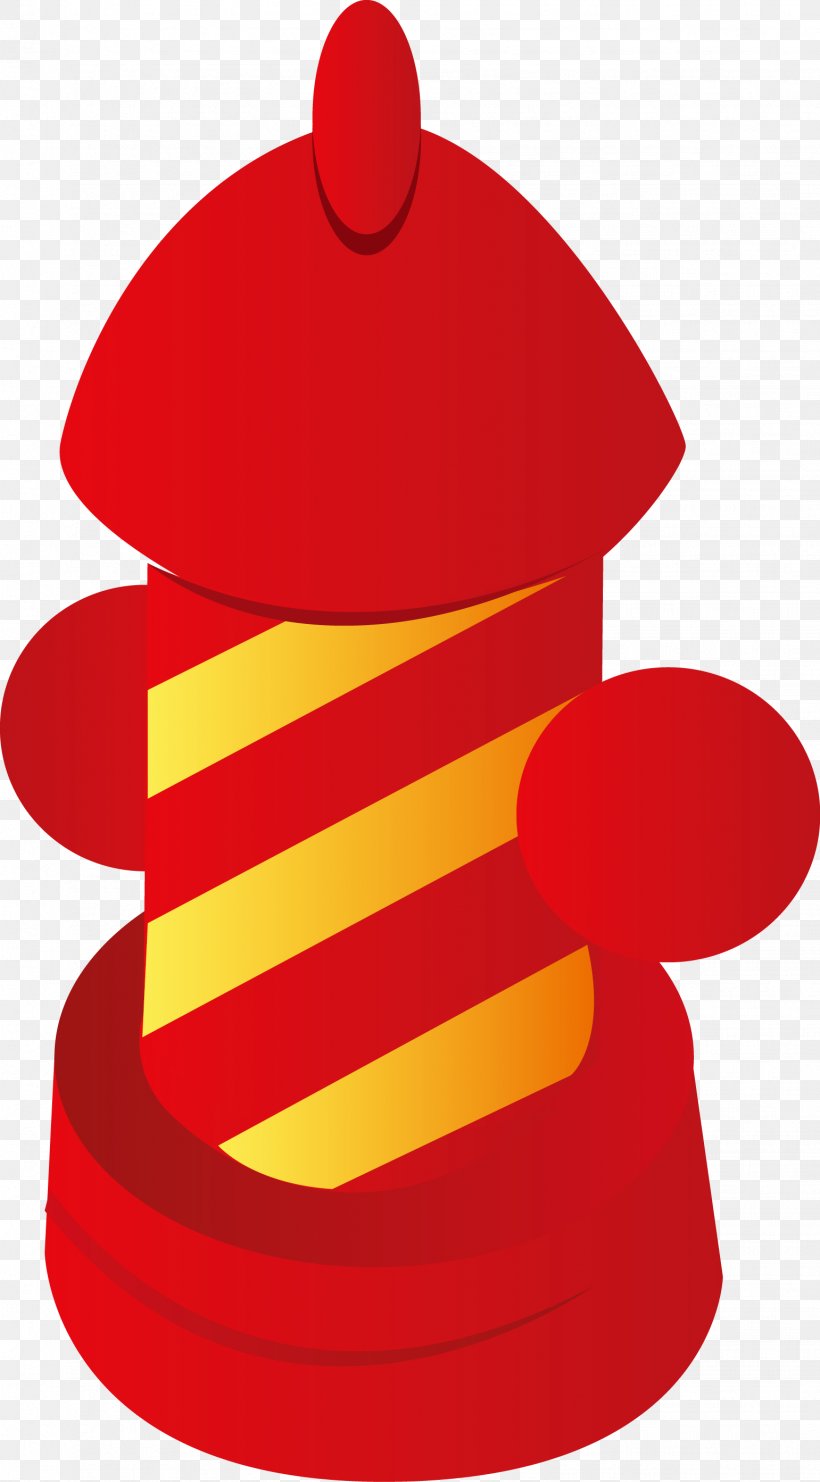 Euclidean Vector Clip Art, PNG, 1541x2786px, Fire Hydrant, Cdr, Red Download Free